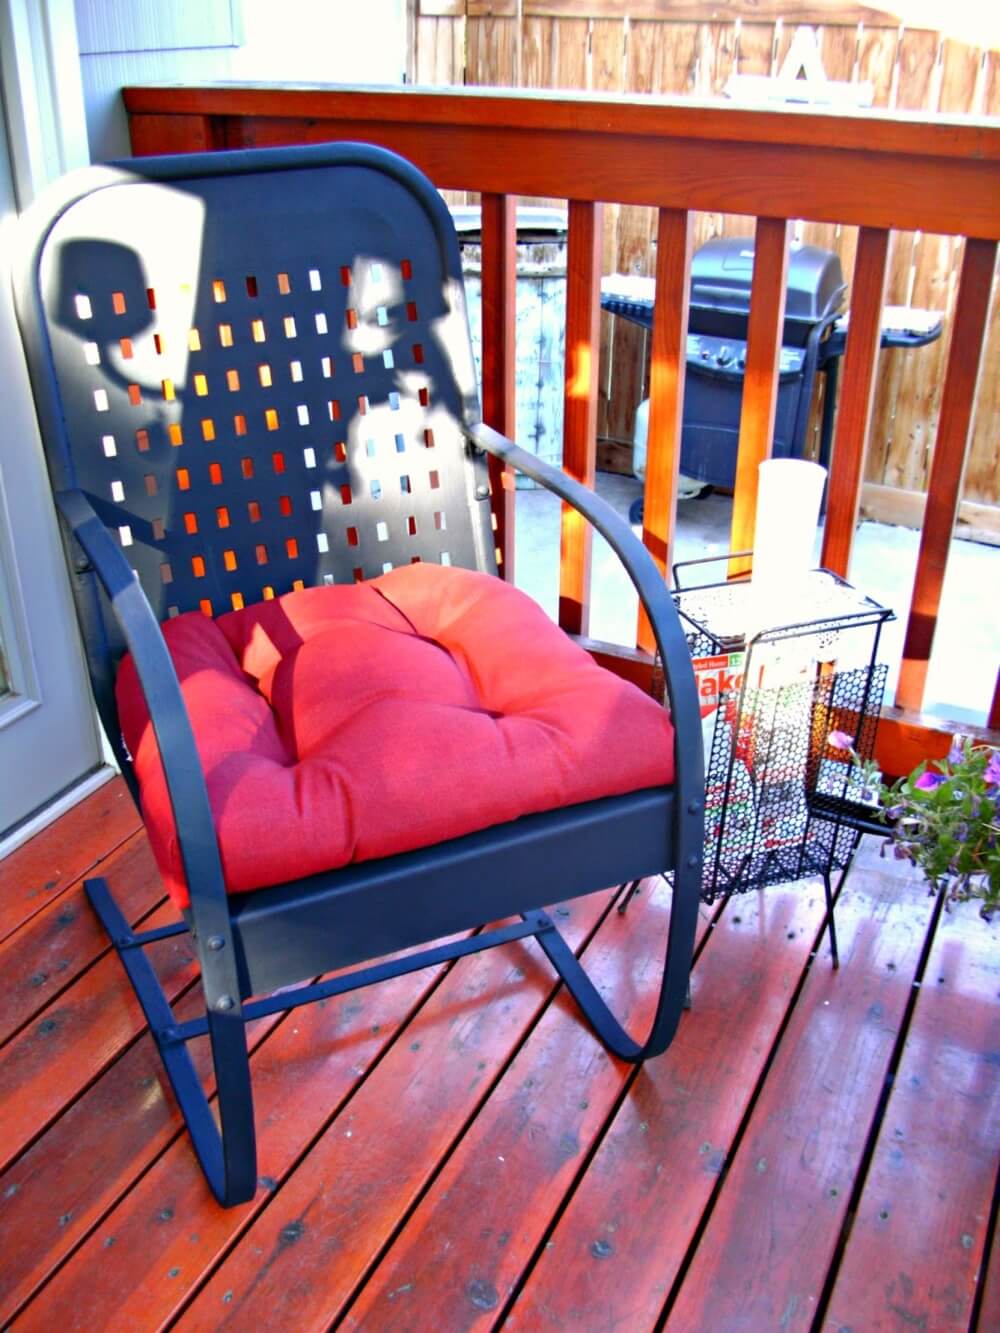 Vintage Outdoor Rocking Chair Makeover